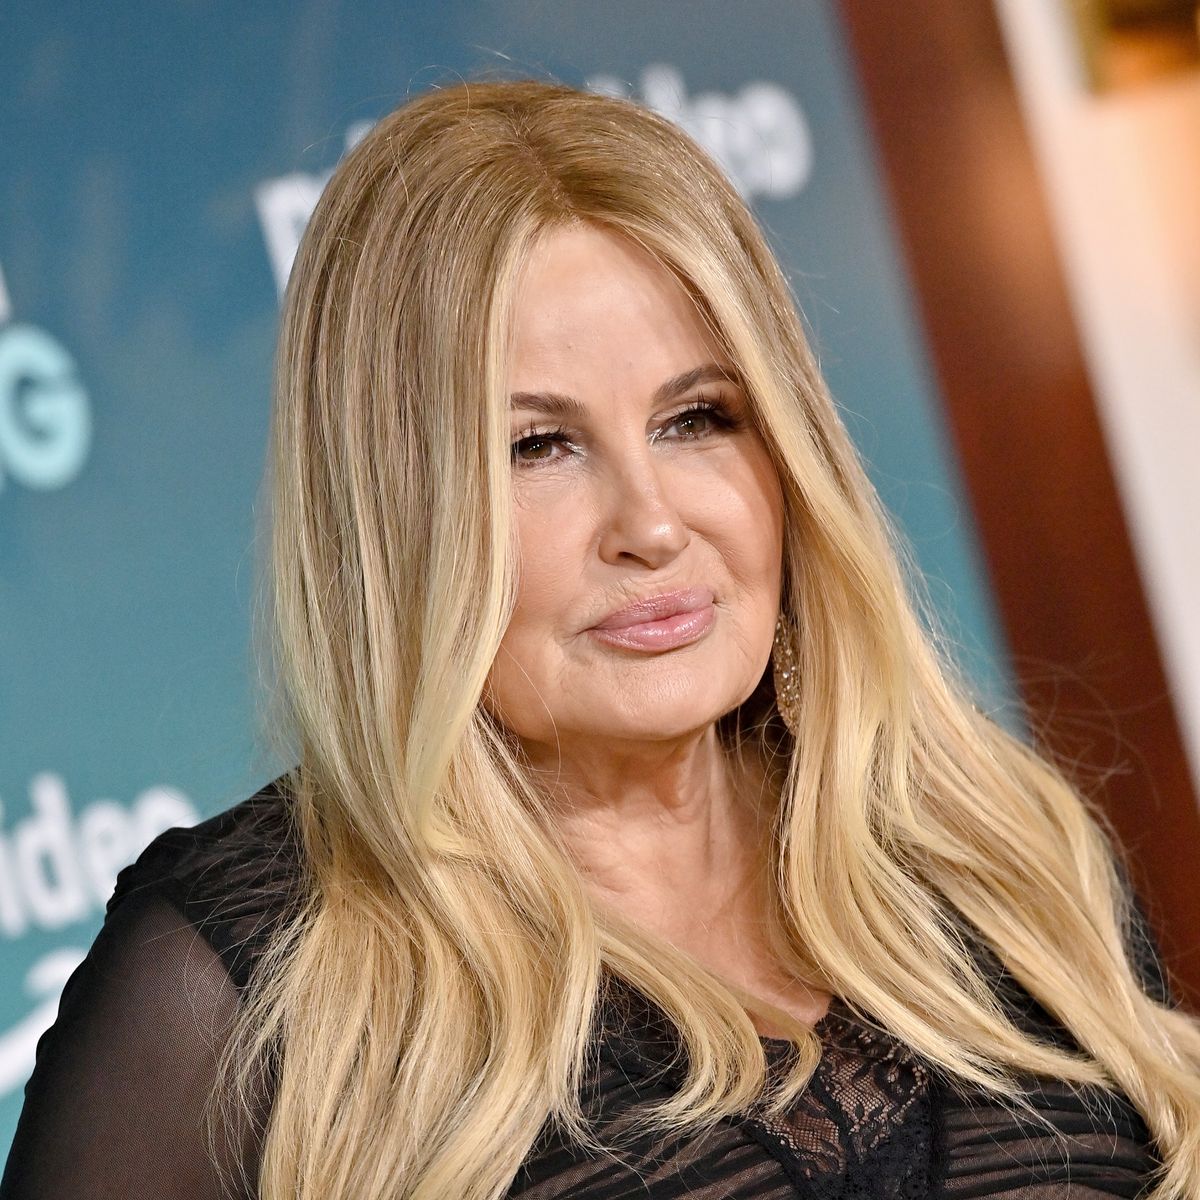 hollywood, california january 18 jennifer coolidge attends the los angeles premiere of prime videos shotgun wedding at tcl chinese theatre on january 18, 2023 in hollywood, california photo by axellebauer griffinfilmmagic